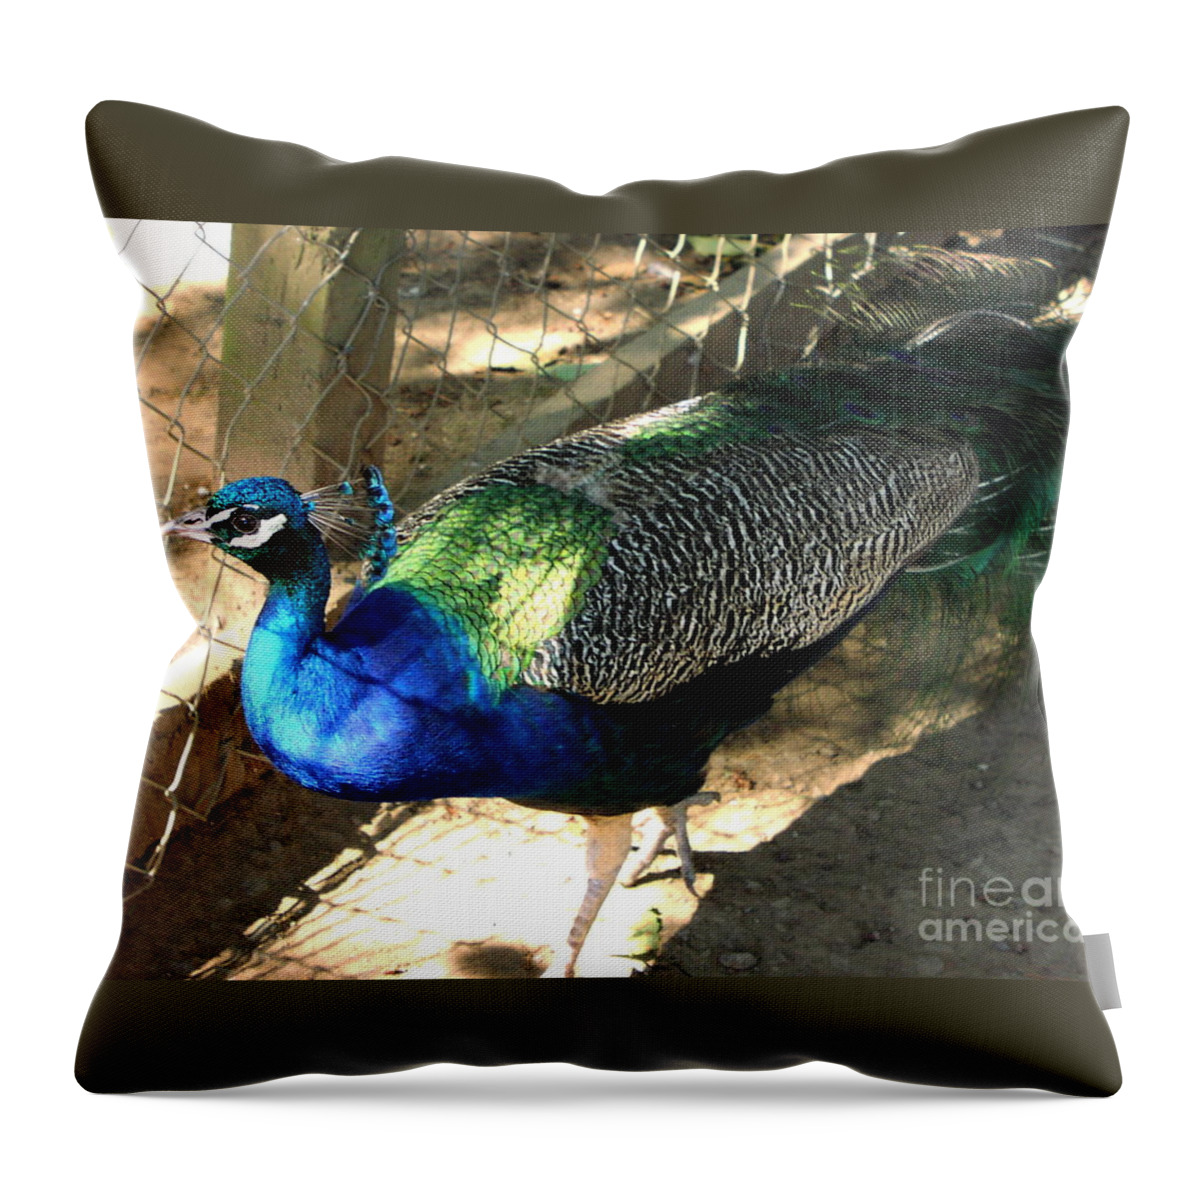 Peacock Throw Pillow featuring the photograph What's Out There? by Rory Siegel